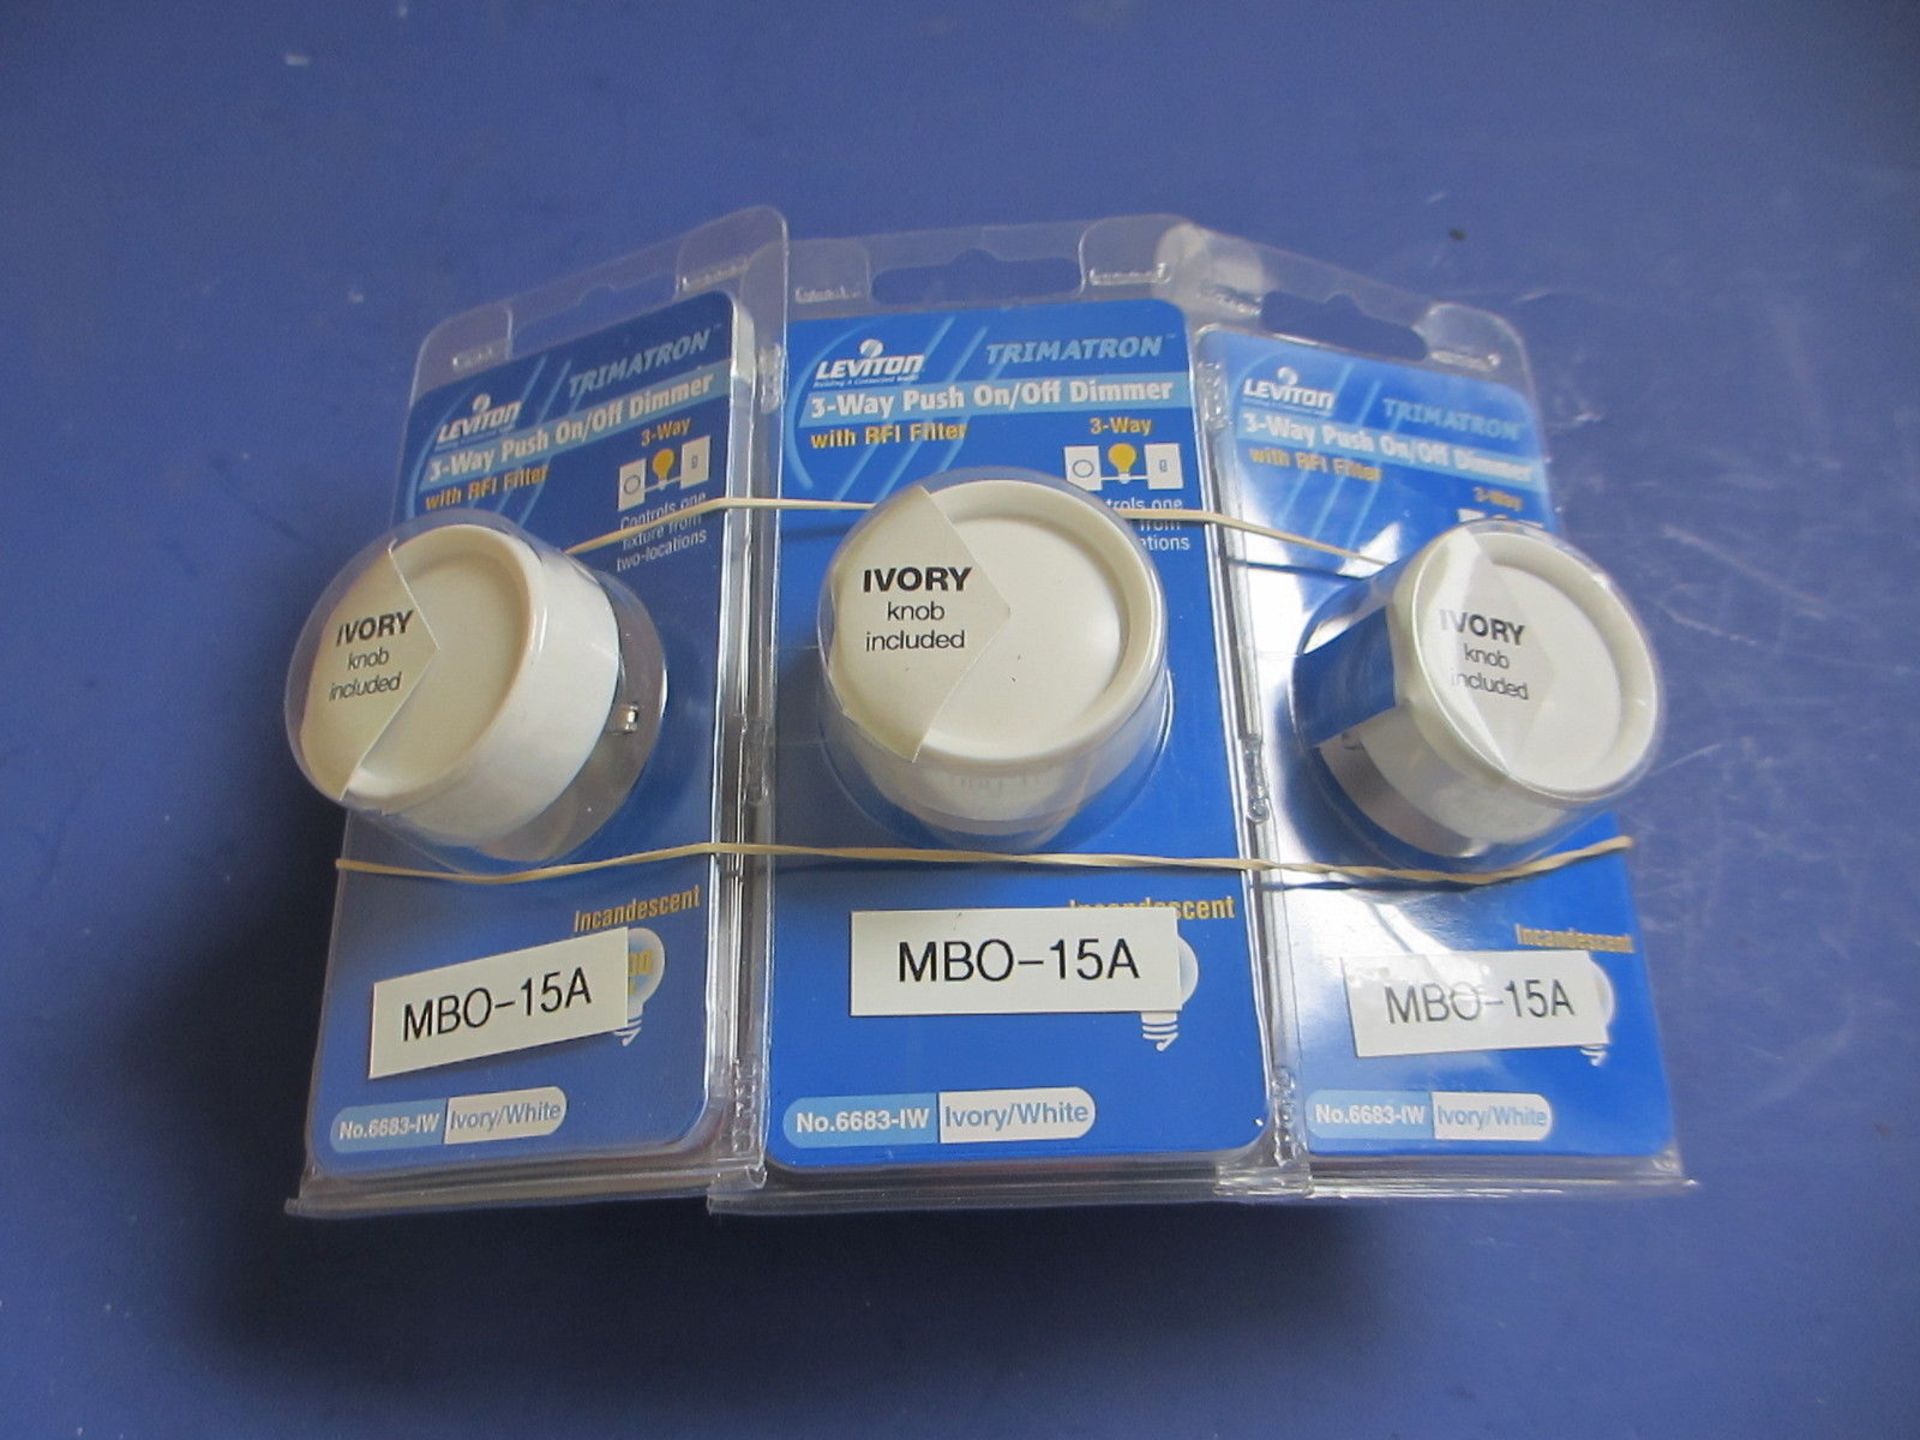 Leviton #6683-IW, 3-Way Push Dimmer - Ivory (Lot of 3)